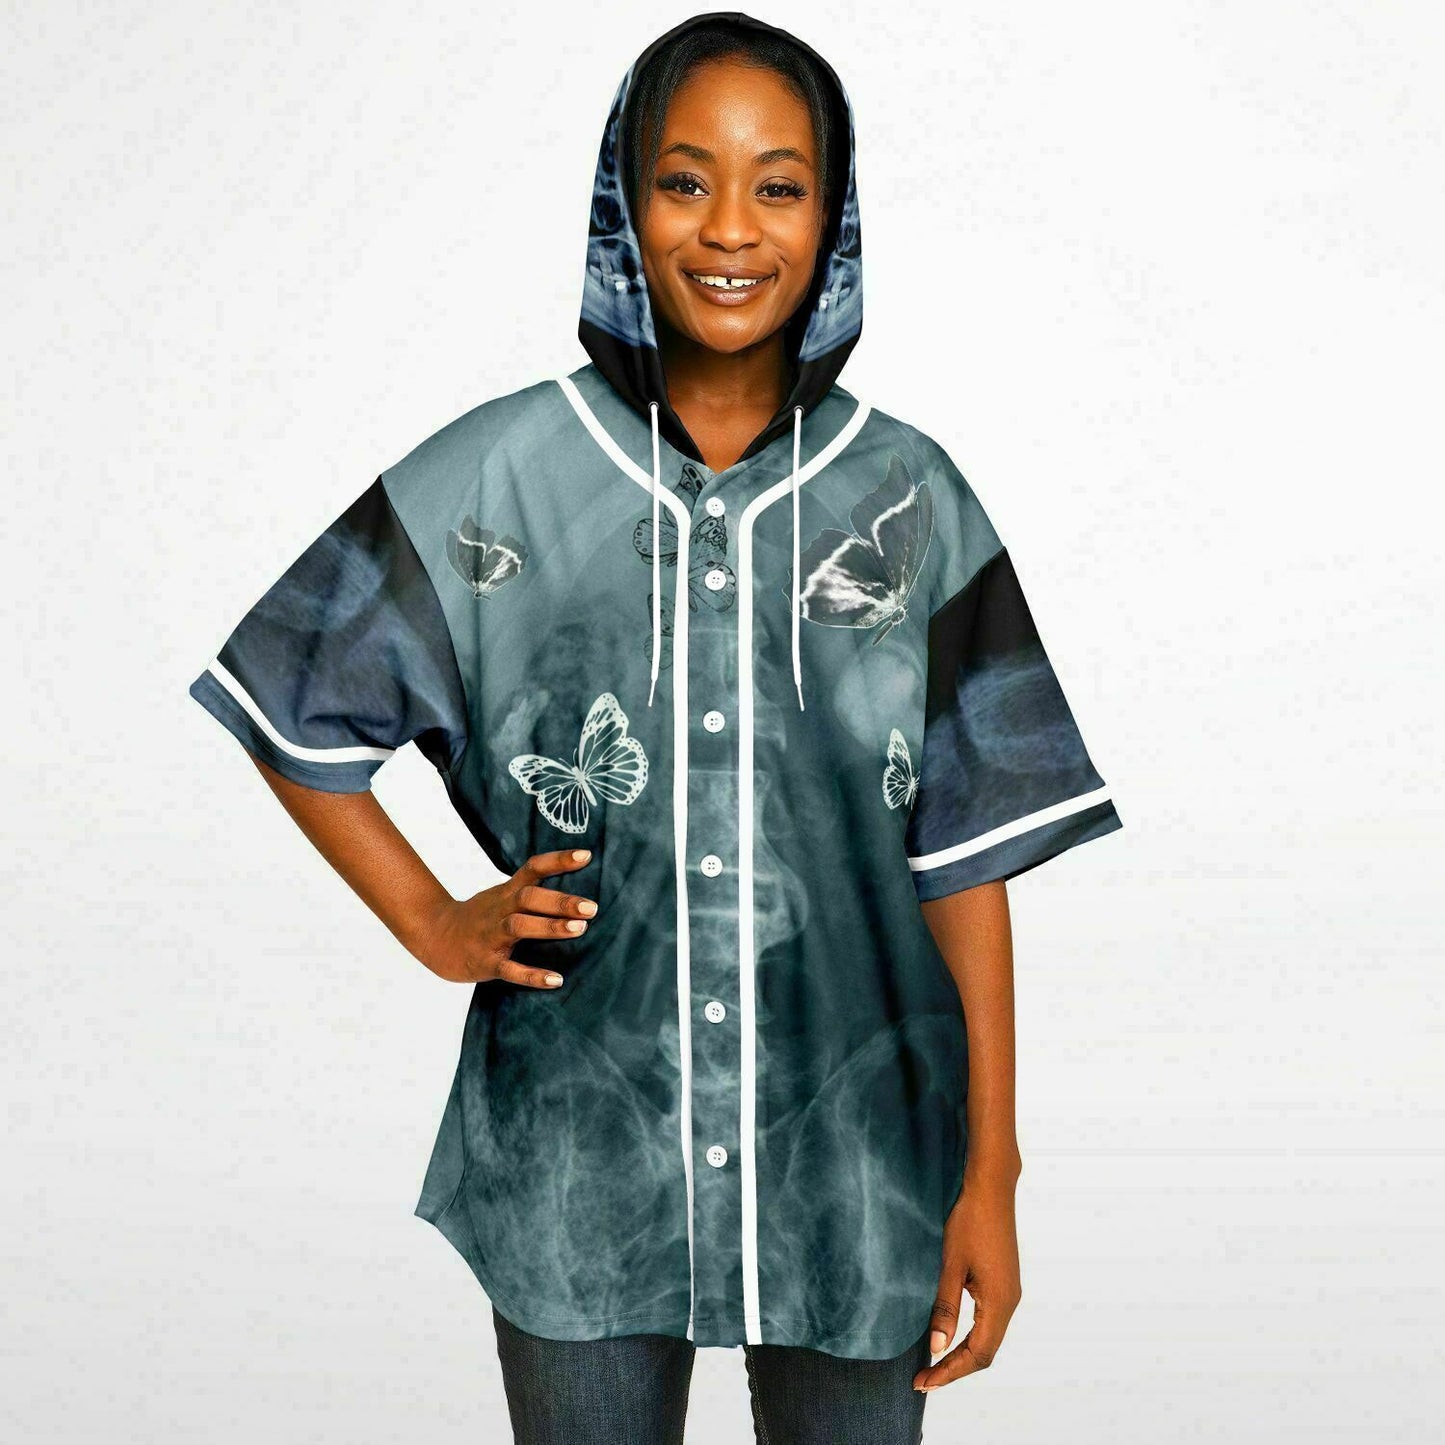 Butterfly Skeletal Vibes: Eco-Friendly Hooded Baseball Fitness Jersey